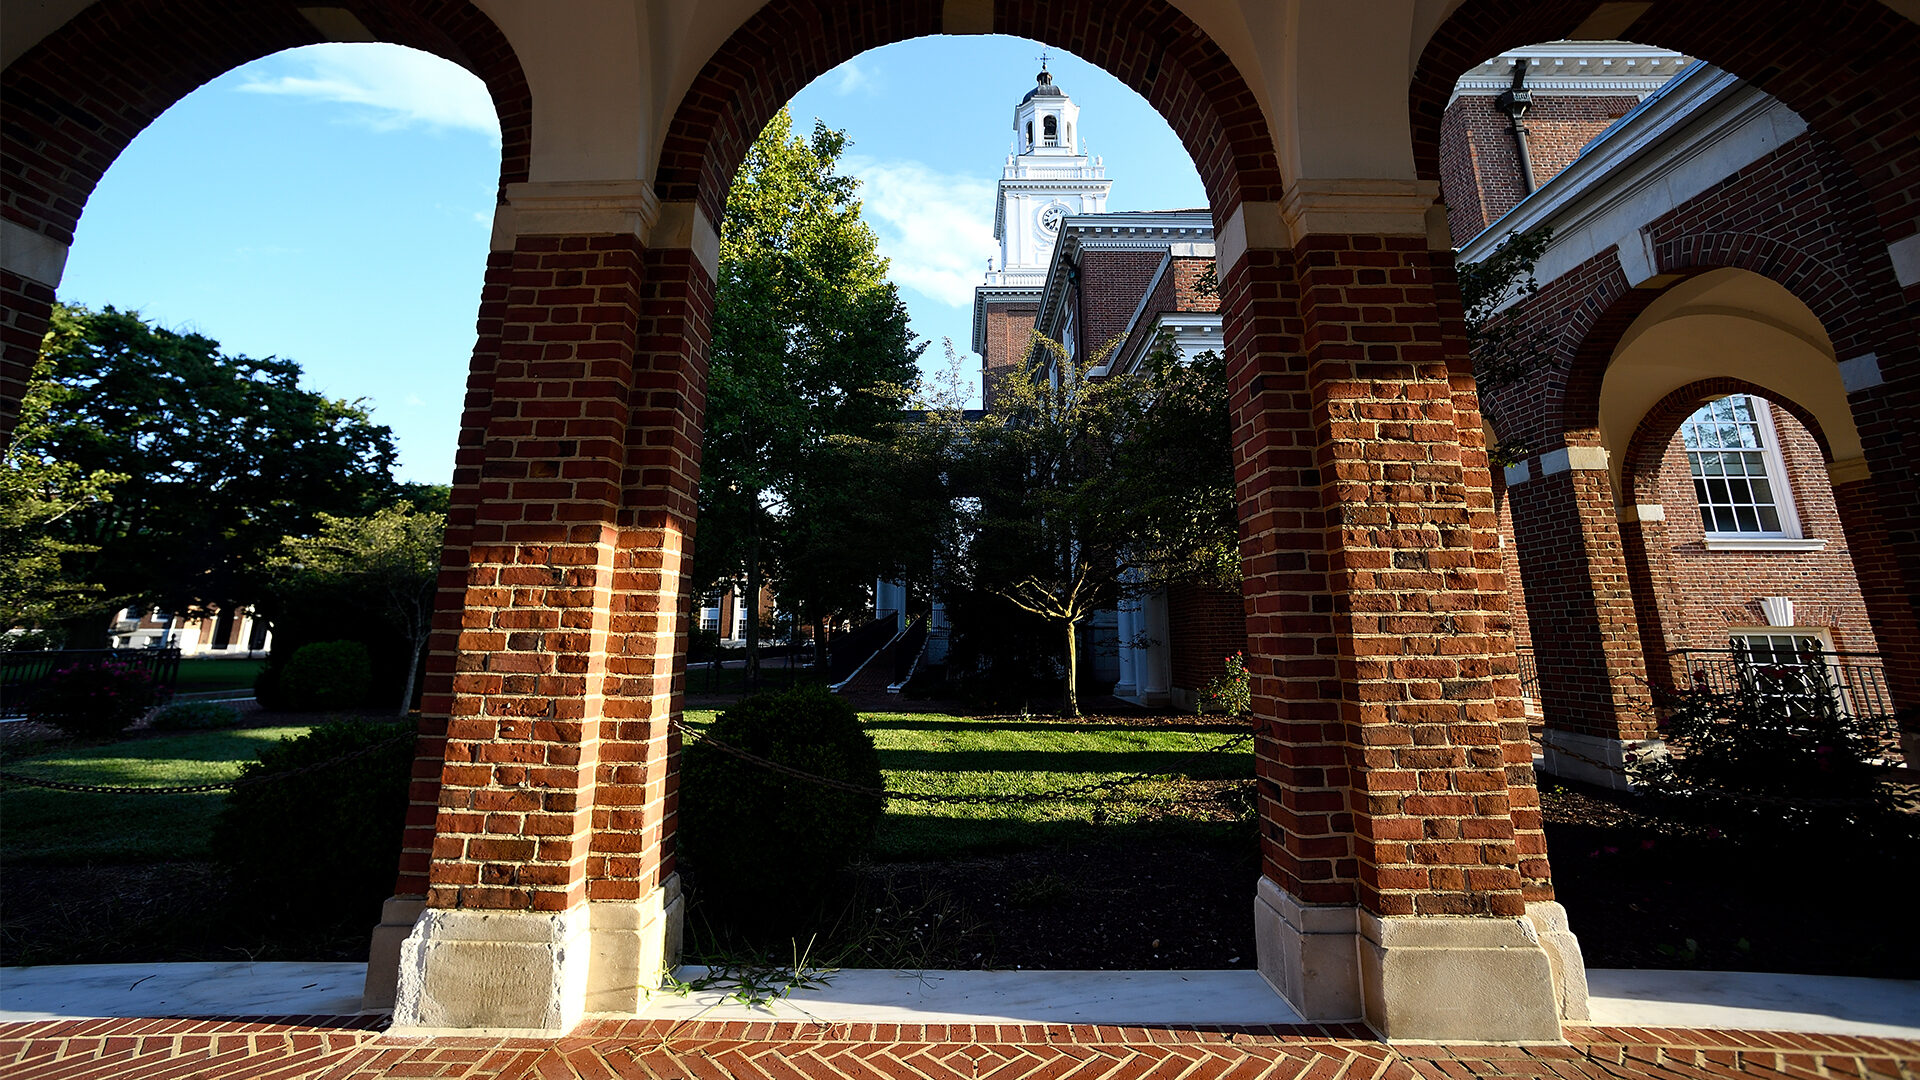 Three brick arches are shown with a tower in the background.